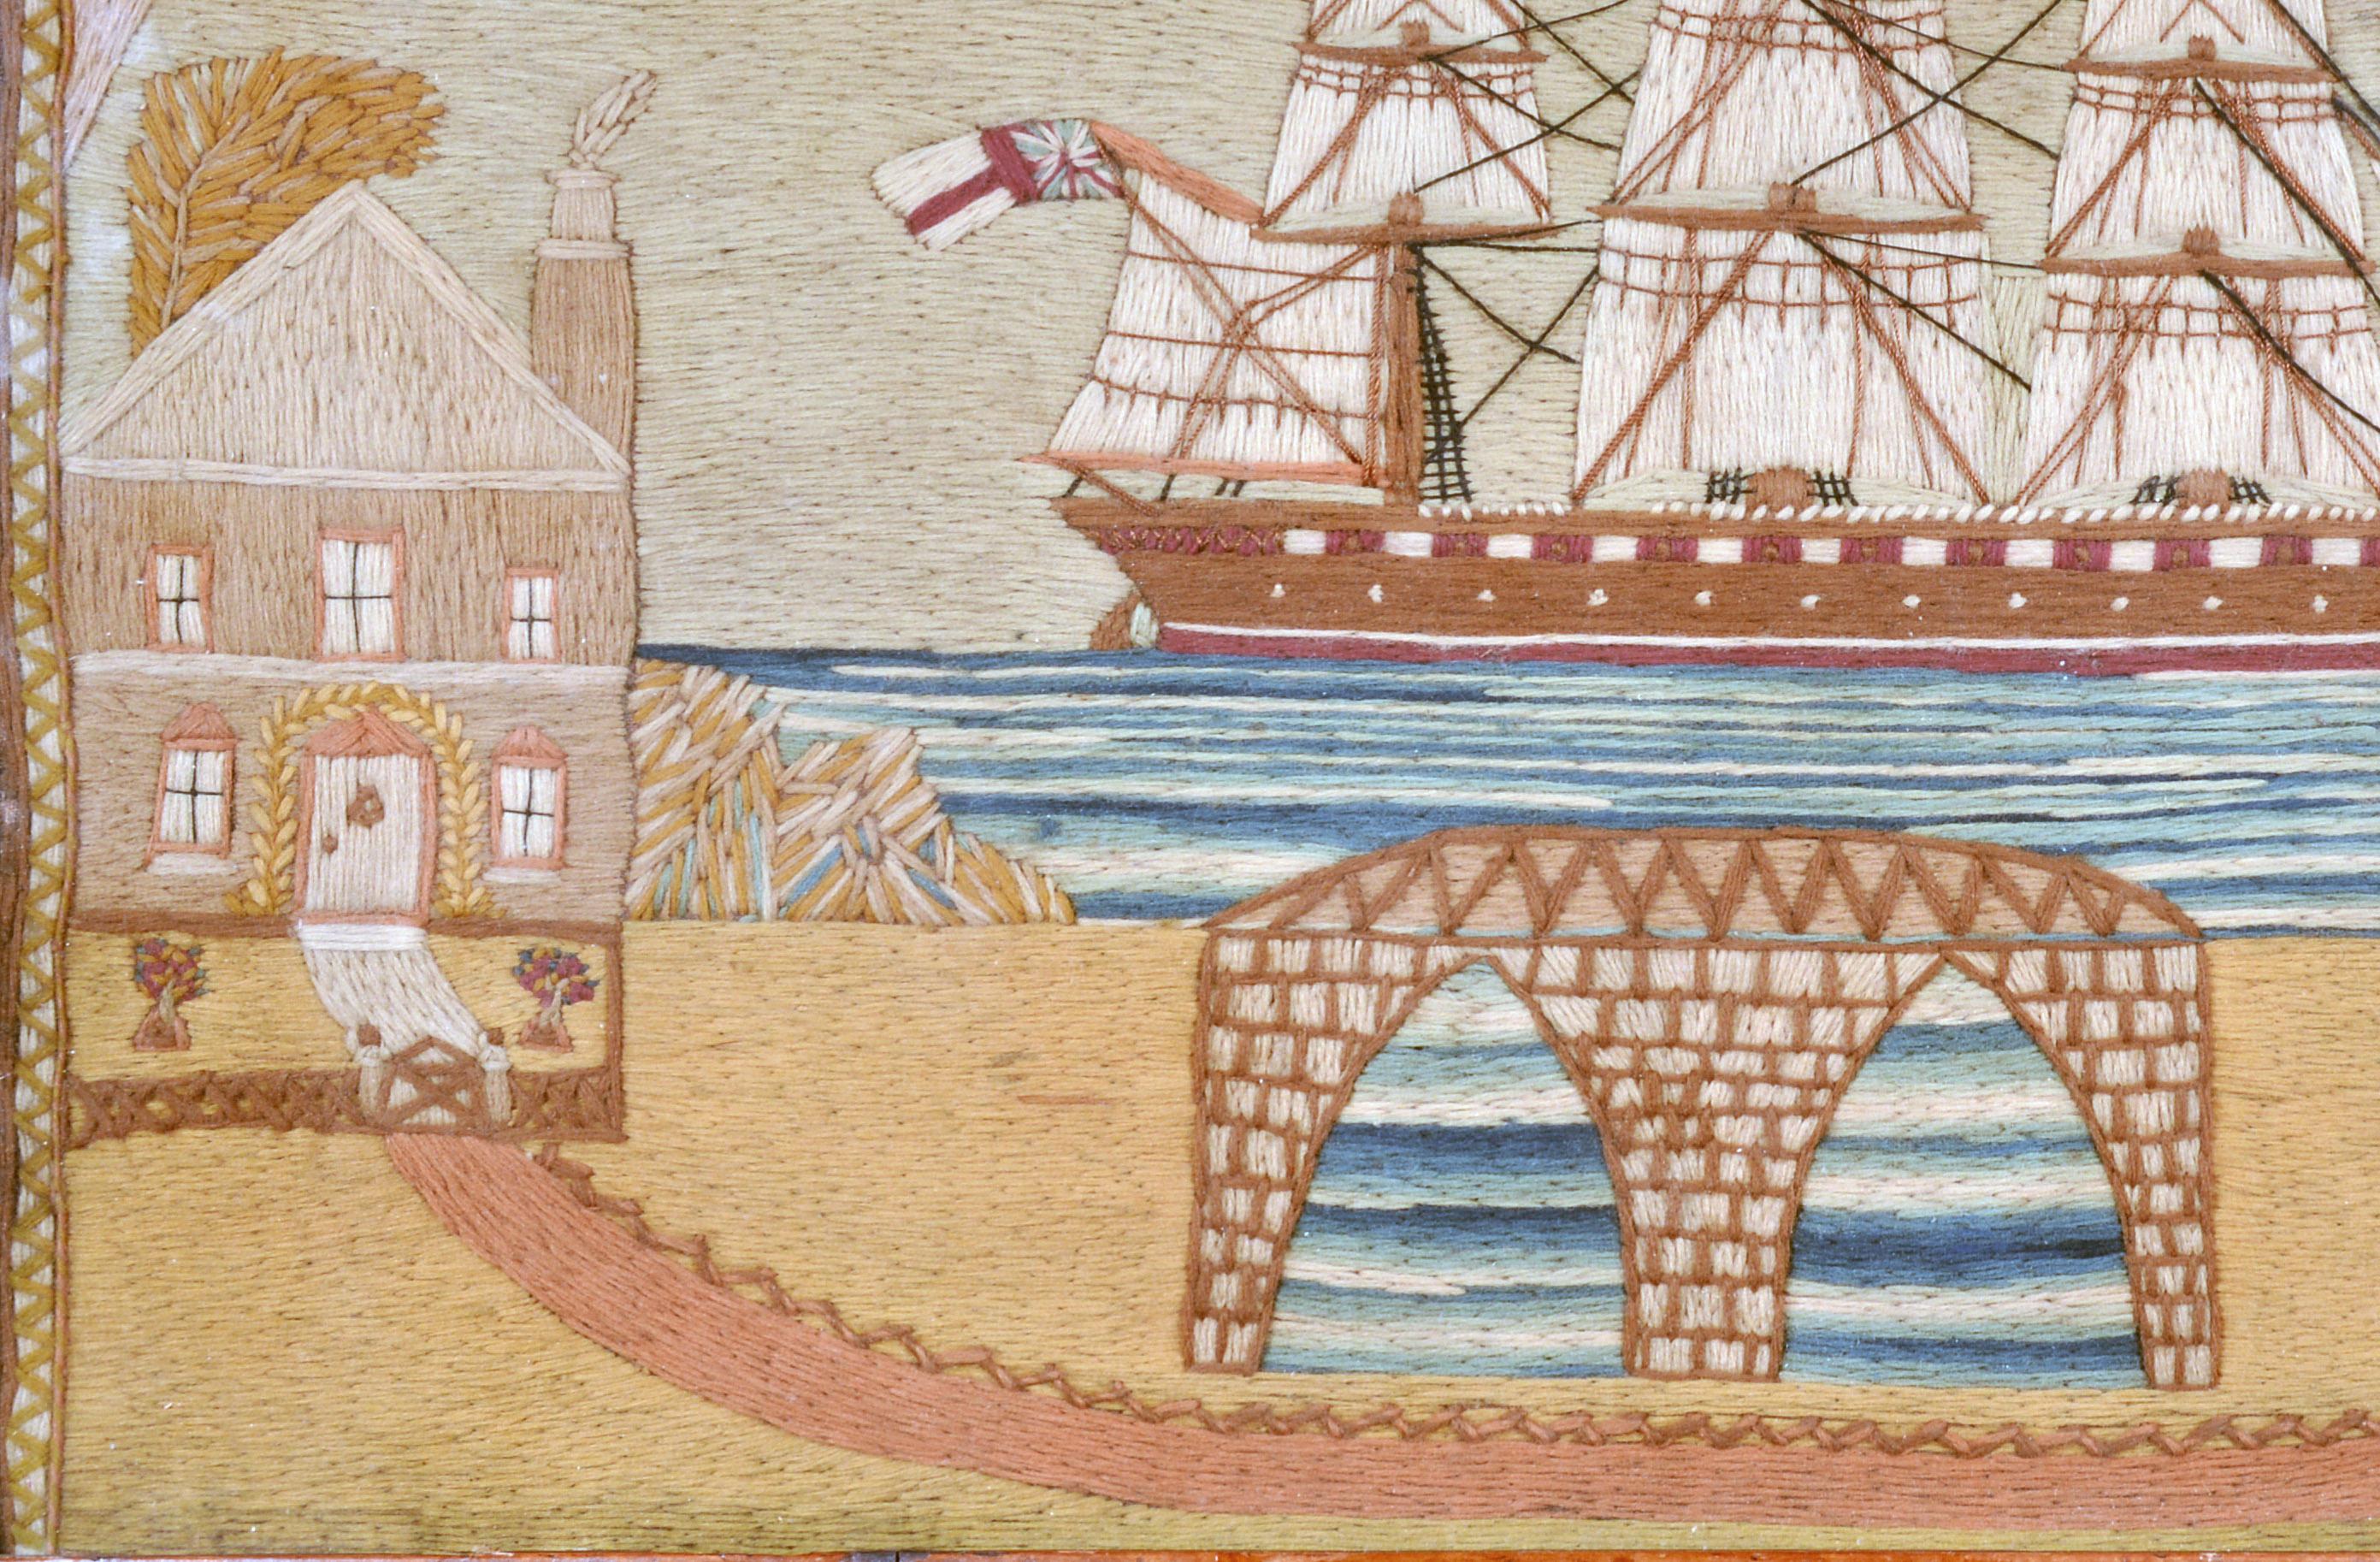 Folk Art British Sailor's Woolwork or Woolie with House and Bridge